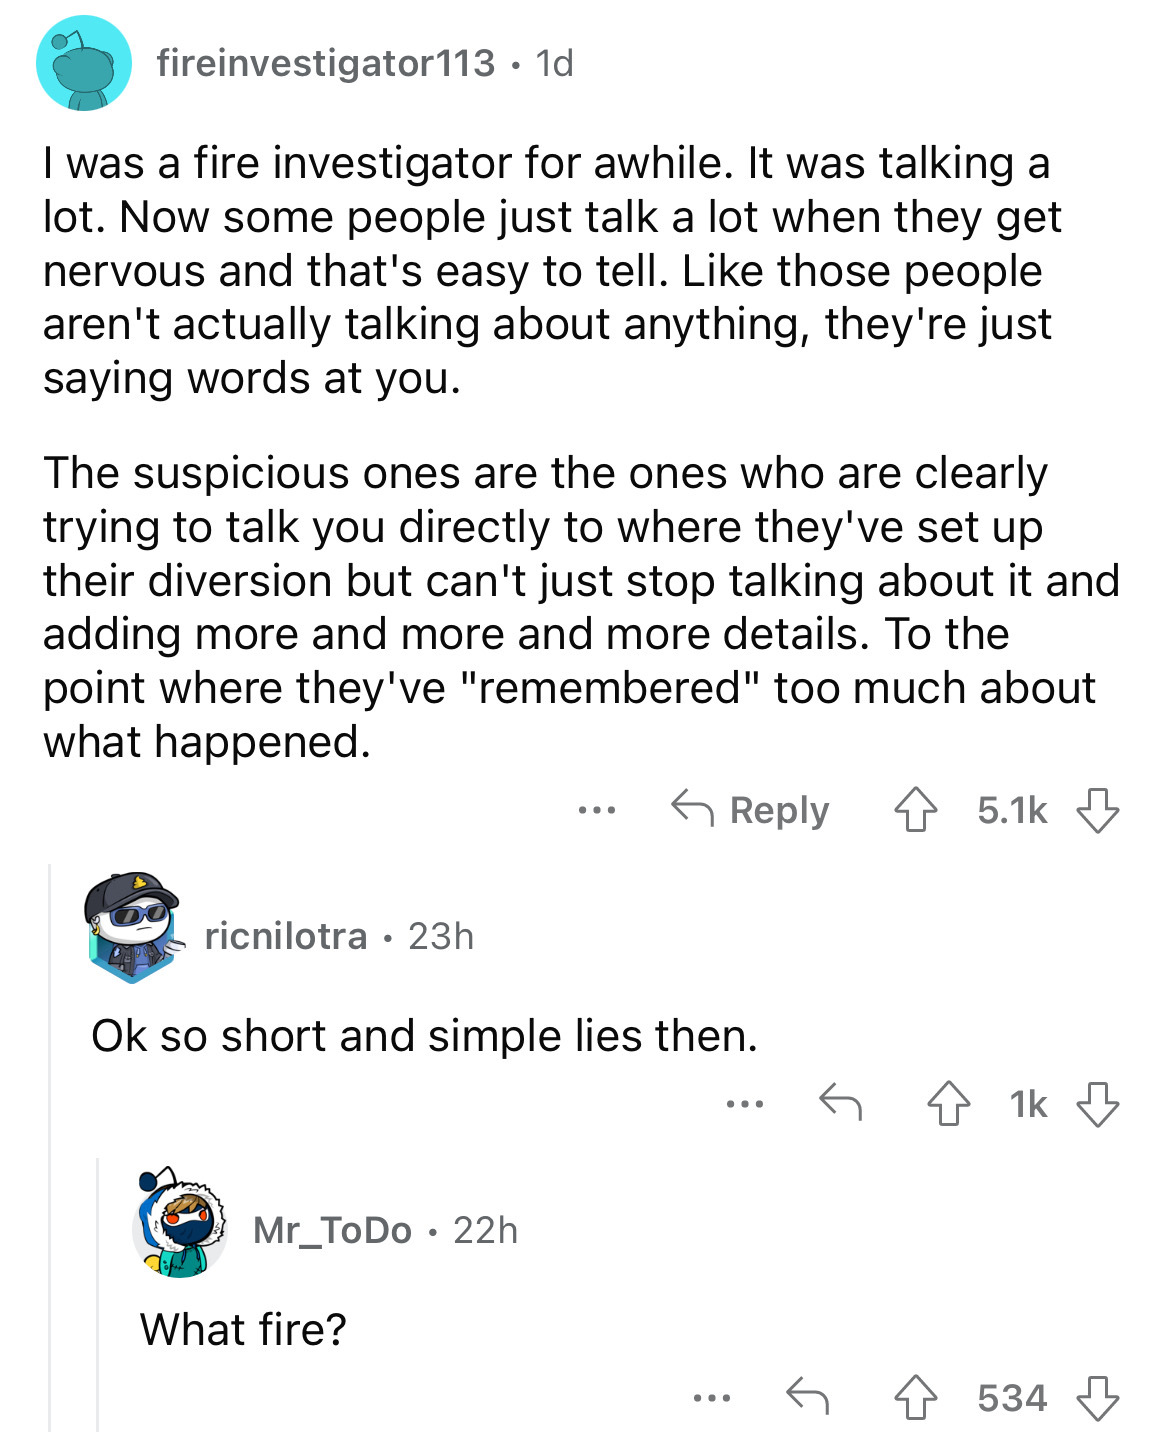 screenshot - fireinvestigator113 1d . I was a fire investigator for awhile. It was talking a lot. Now some people just talk a lot when they get nervous and that's easy to tell. those people aren't actually talking about anything, they're just saying words